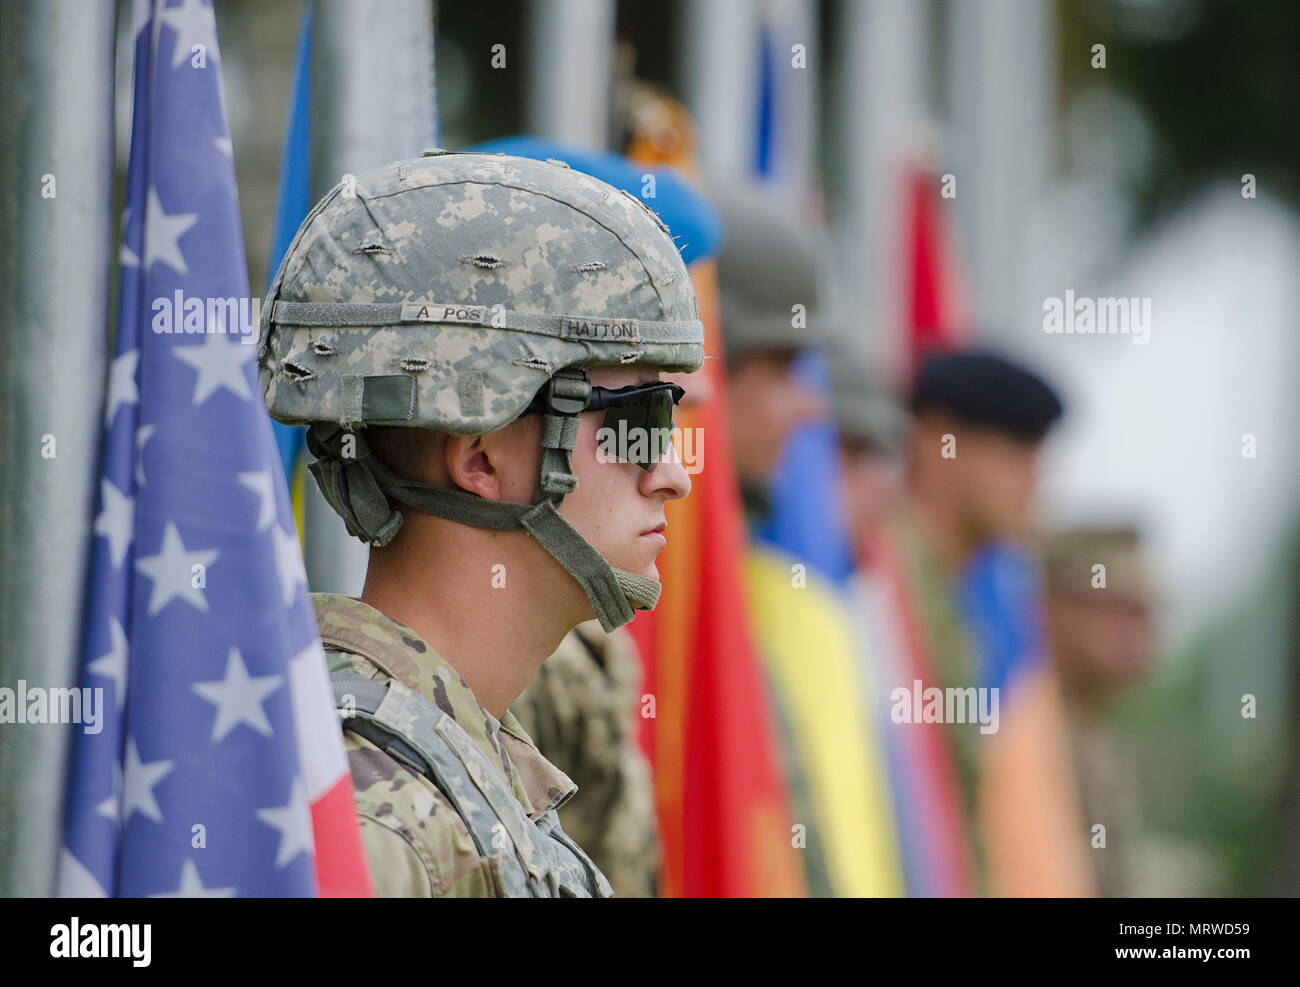 Soldiers from Armenia, Croatia, Montenegro, Romania, Ukraine and the United States wait to raise their nation’s flag during the official opening ceremony of multinational training exercise Getica Saber 17 at Joint National Training Center in Cincu, Romania, July 7, 2017. Getica Saber 17 is a U.S-led fire support coordination exercise and combined arms live-fire exercise that incorporates six Allied and partner nations with more than 4,000 Soldiers. Getica Saber runs concurrent with Saber Guardian, a U.S. Army Europe-led, multinational exercise that spans across Bulgaria, Hungary and Romania wi Stock Photo